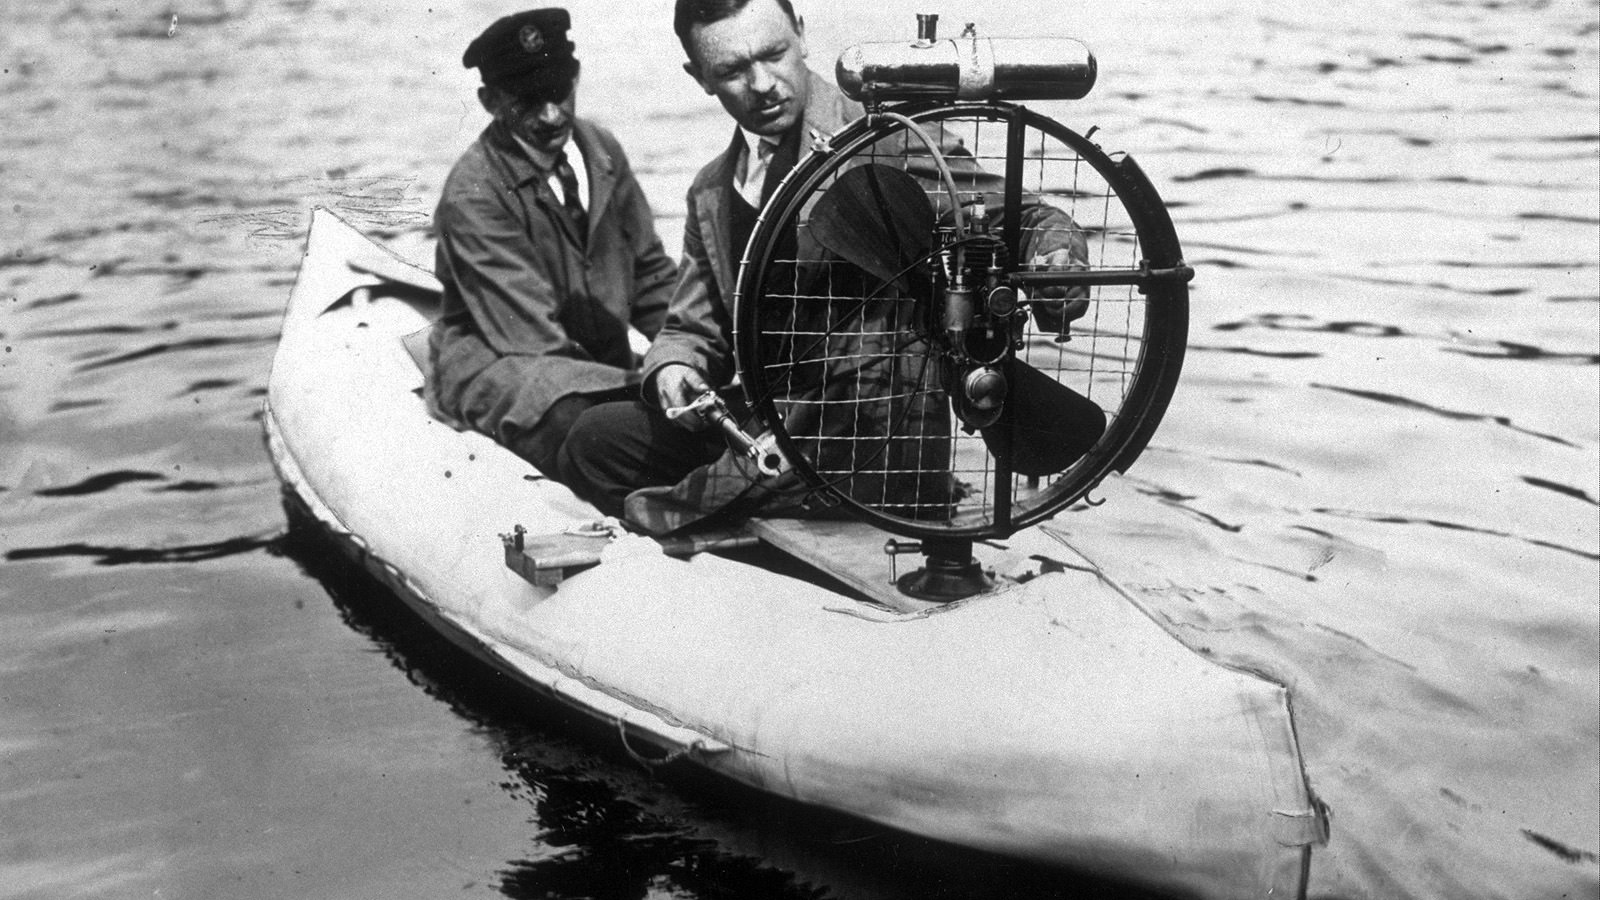 A blow-up motorized canoe, powered by an air-propeller, being tested by its inventor in 1935.